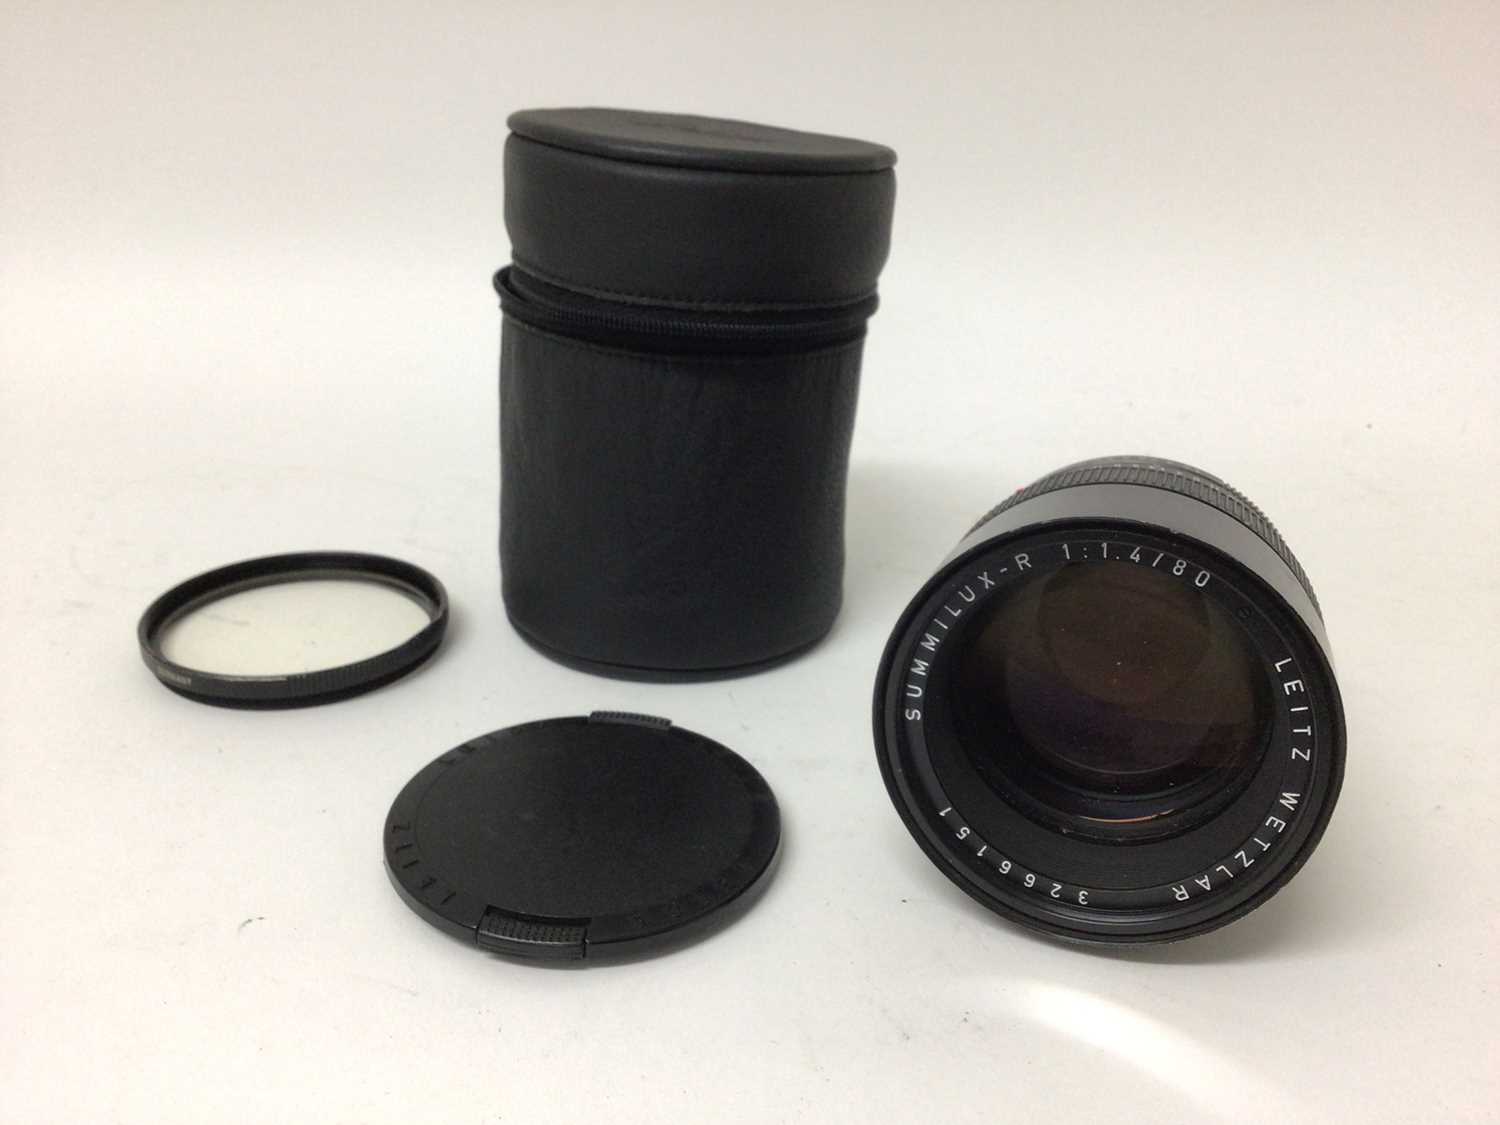 Lot 2356 - Leica Summilux-R f/1.4 80mm lens for Leica R series cameras, with protective filter, lens cap and original leather case